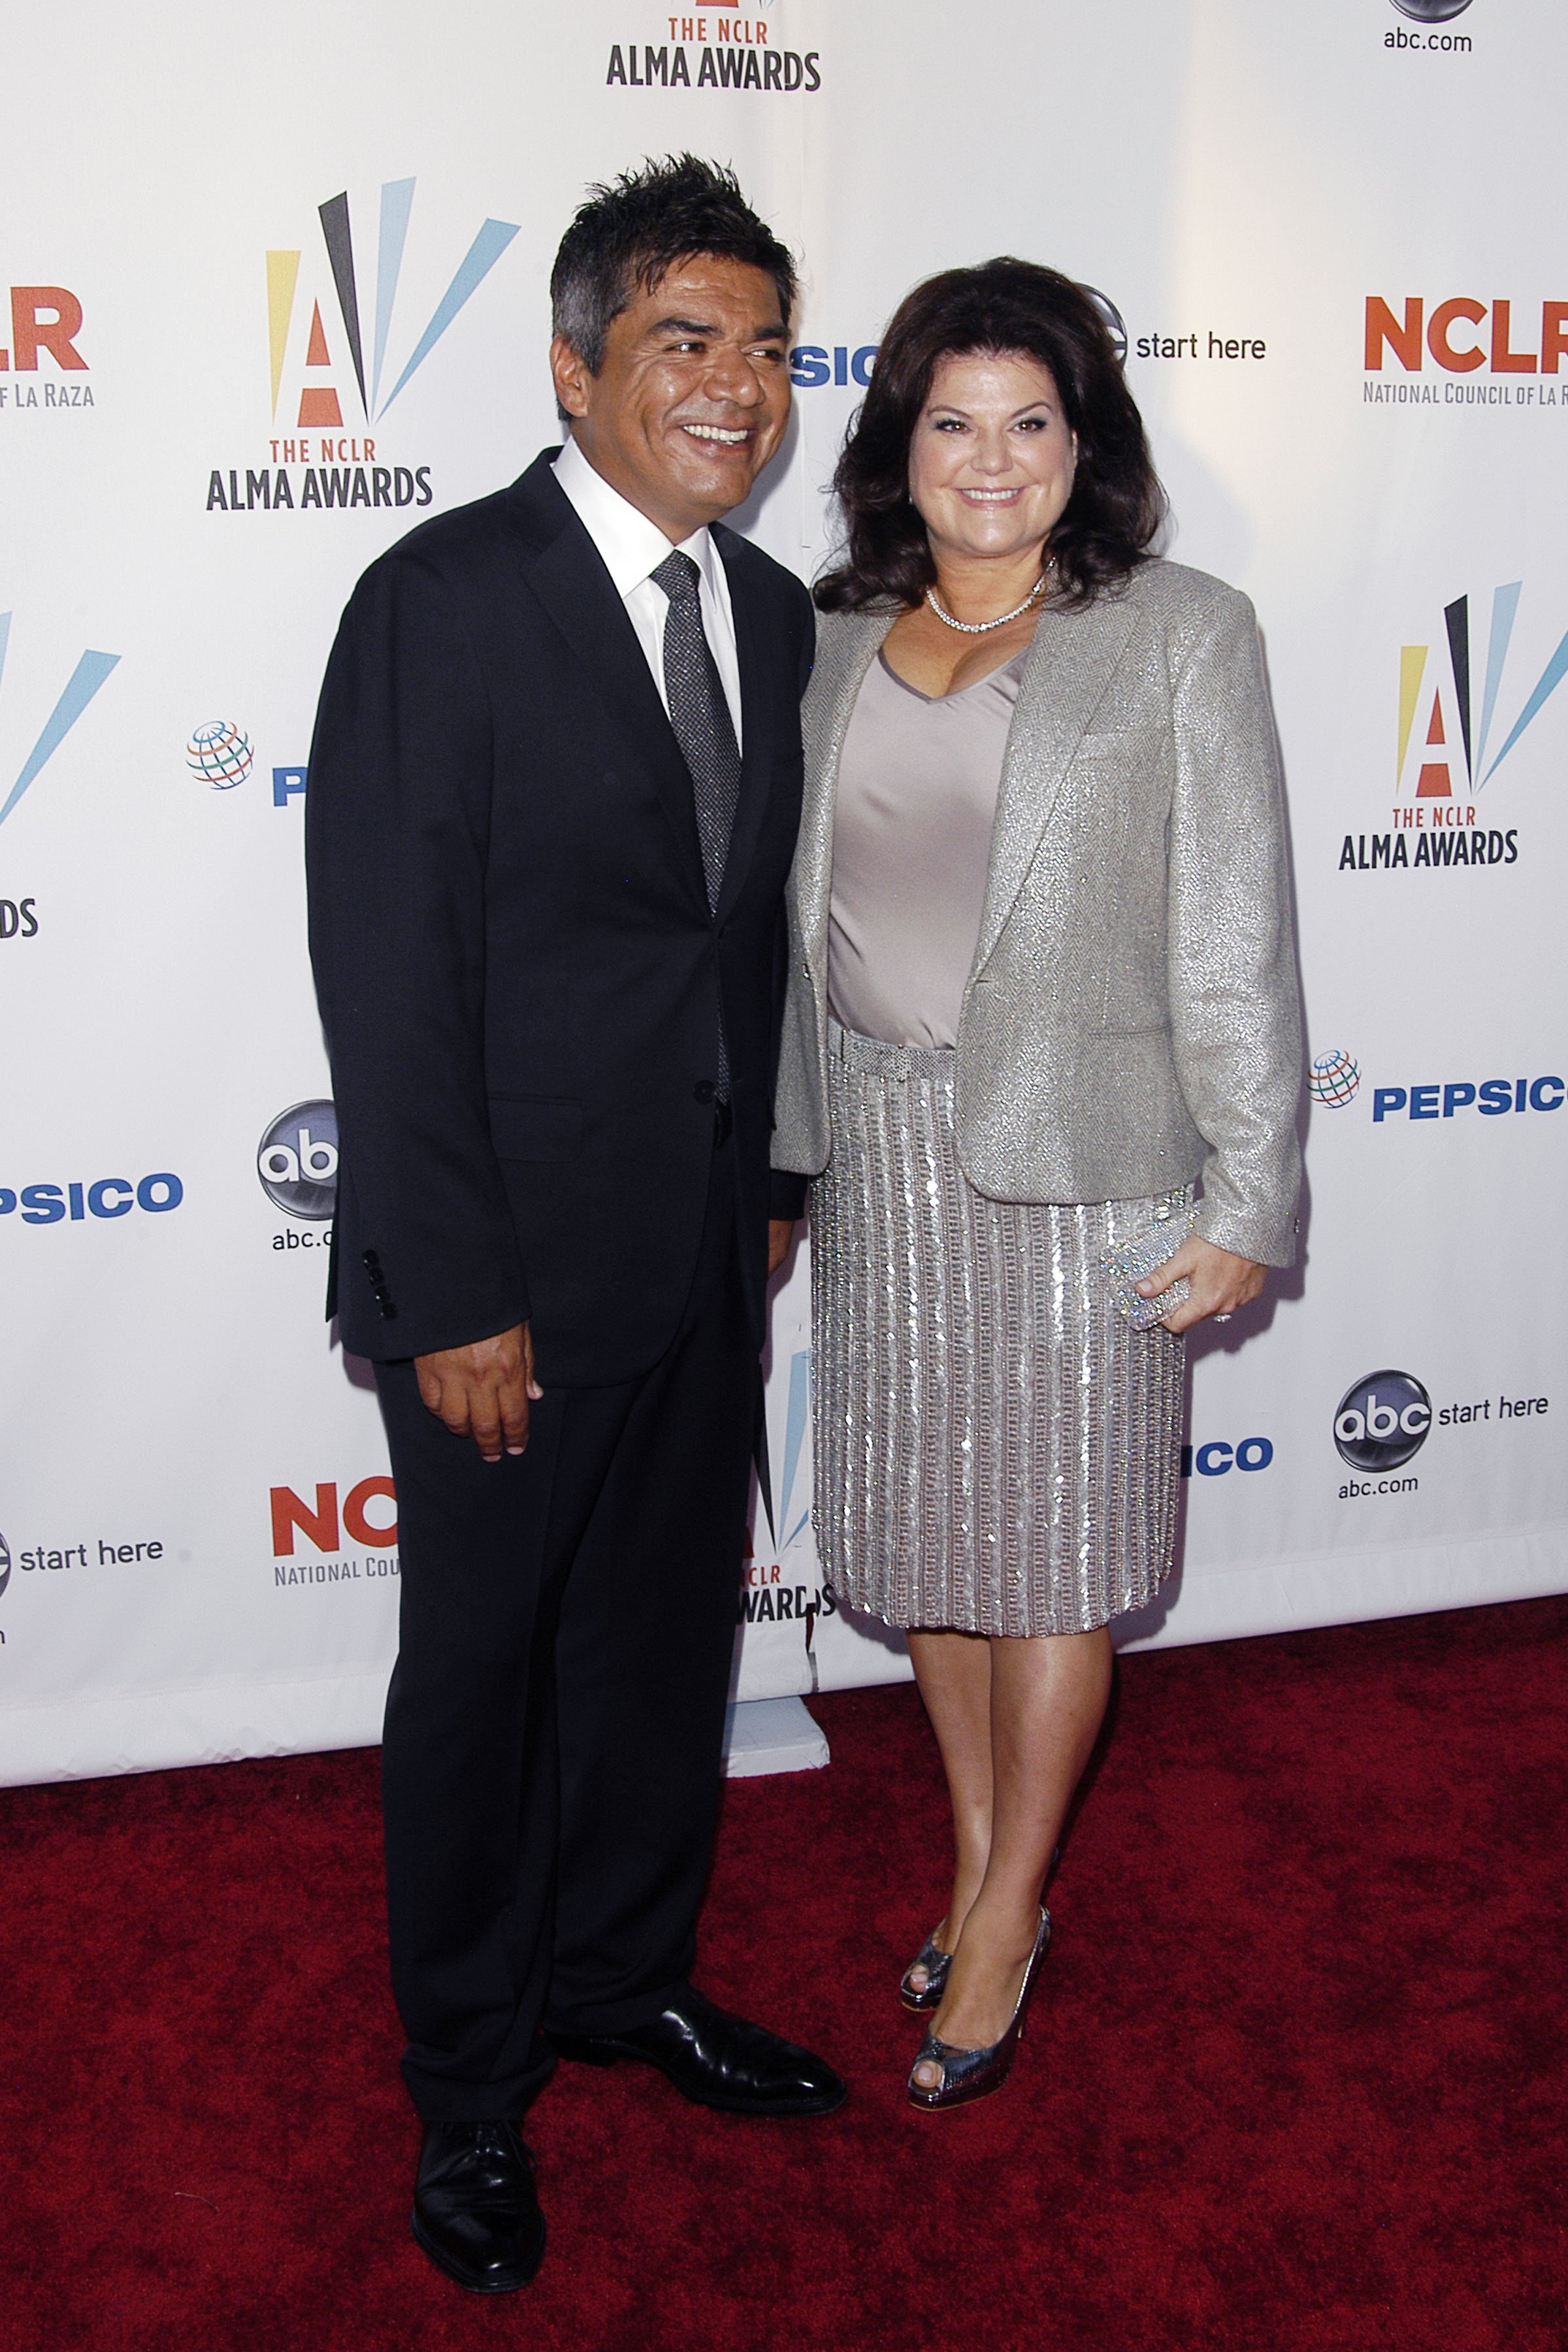 Comedian George Lopez and wife Ann Serrano at the 2009 ALMA AWARDS at Rolls Royce Hall on September 17 2009 | Source: Getty Images